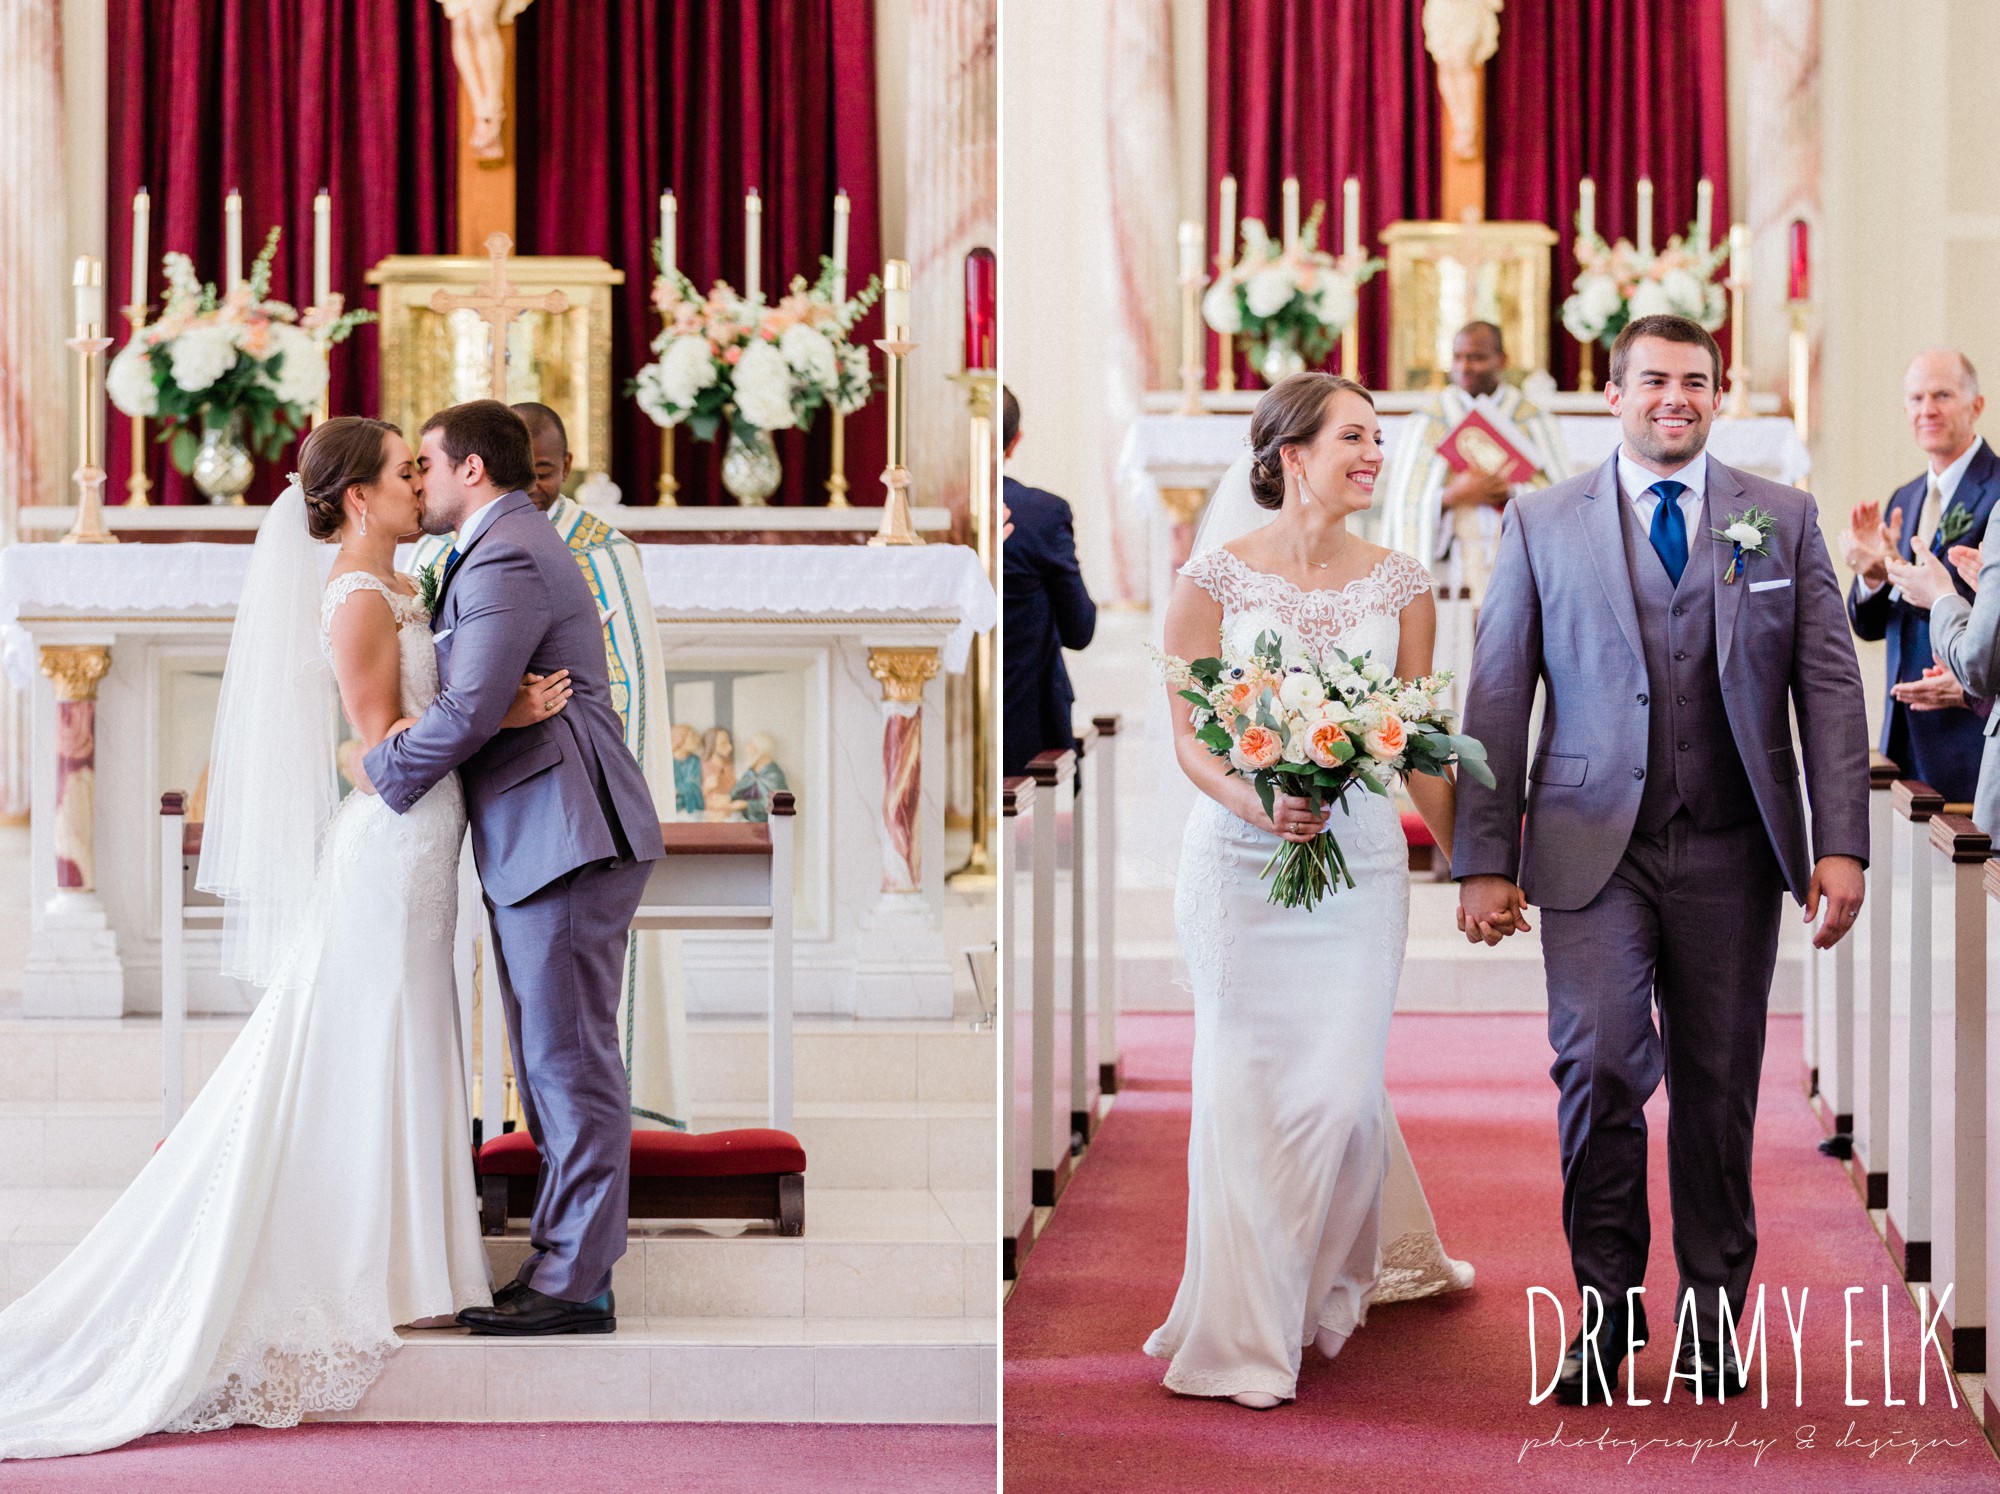 bride and groom walking down the aisle, church wedding, essense of australia column dress, unforgettable floral, spring wedding photo college station texas, dreamy elk photography and design